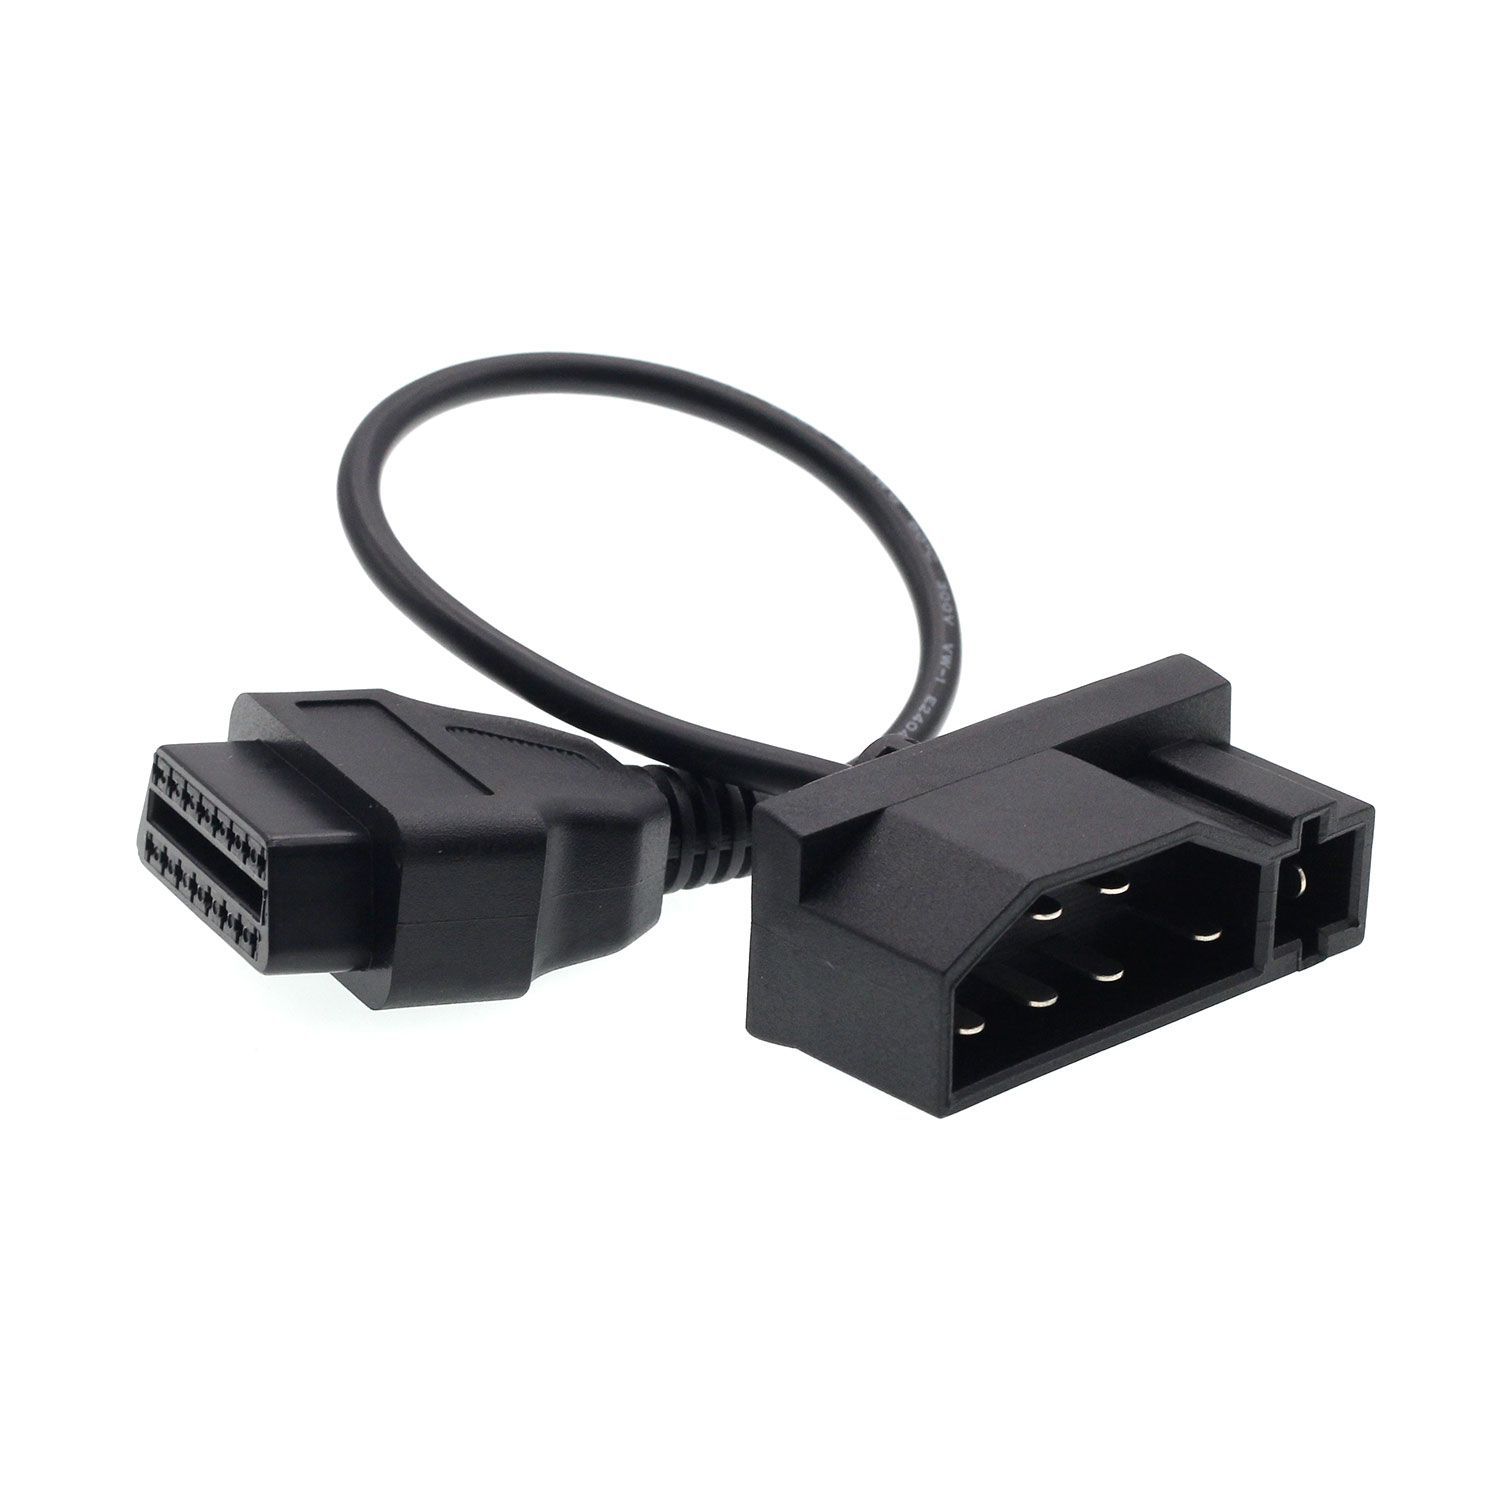 Ford High Quality 7 pin plug obd1 to OBD2 OBDII 16 pin diagnostic adapter cable